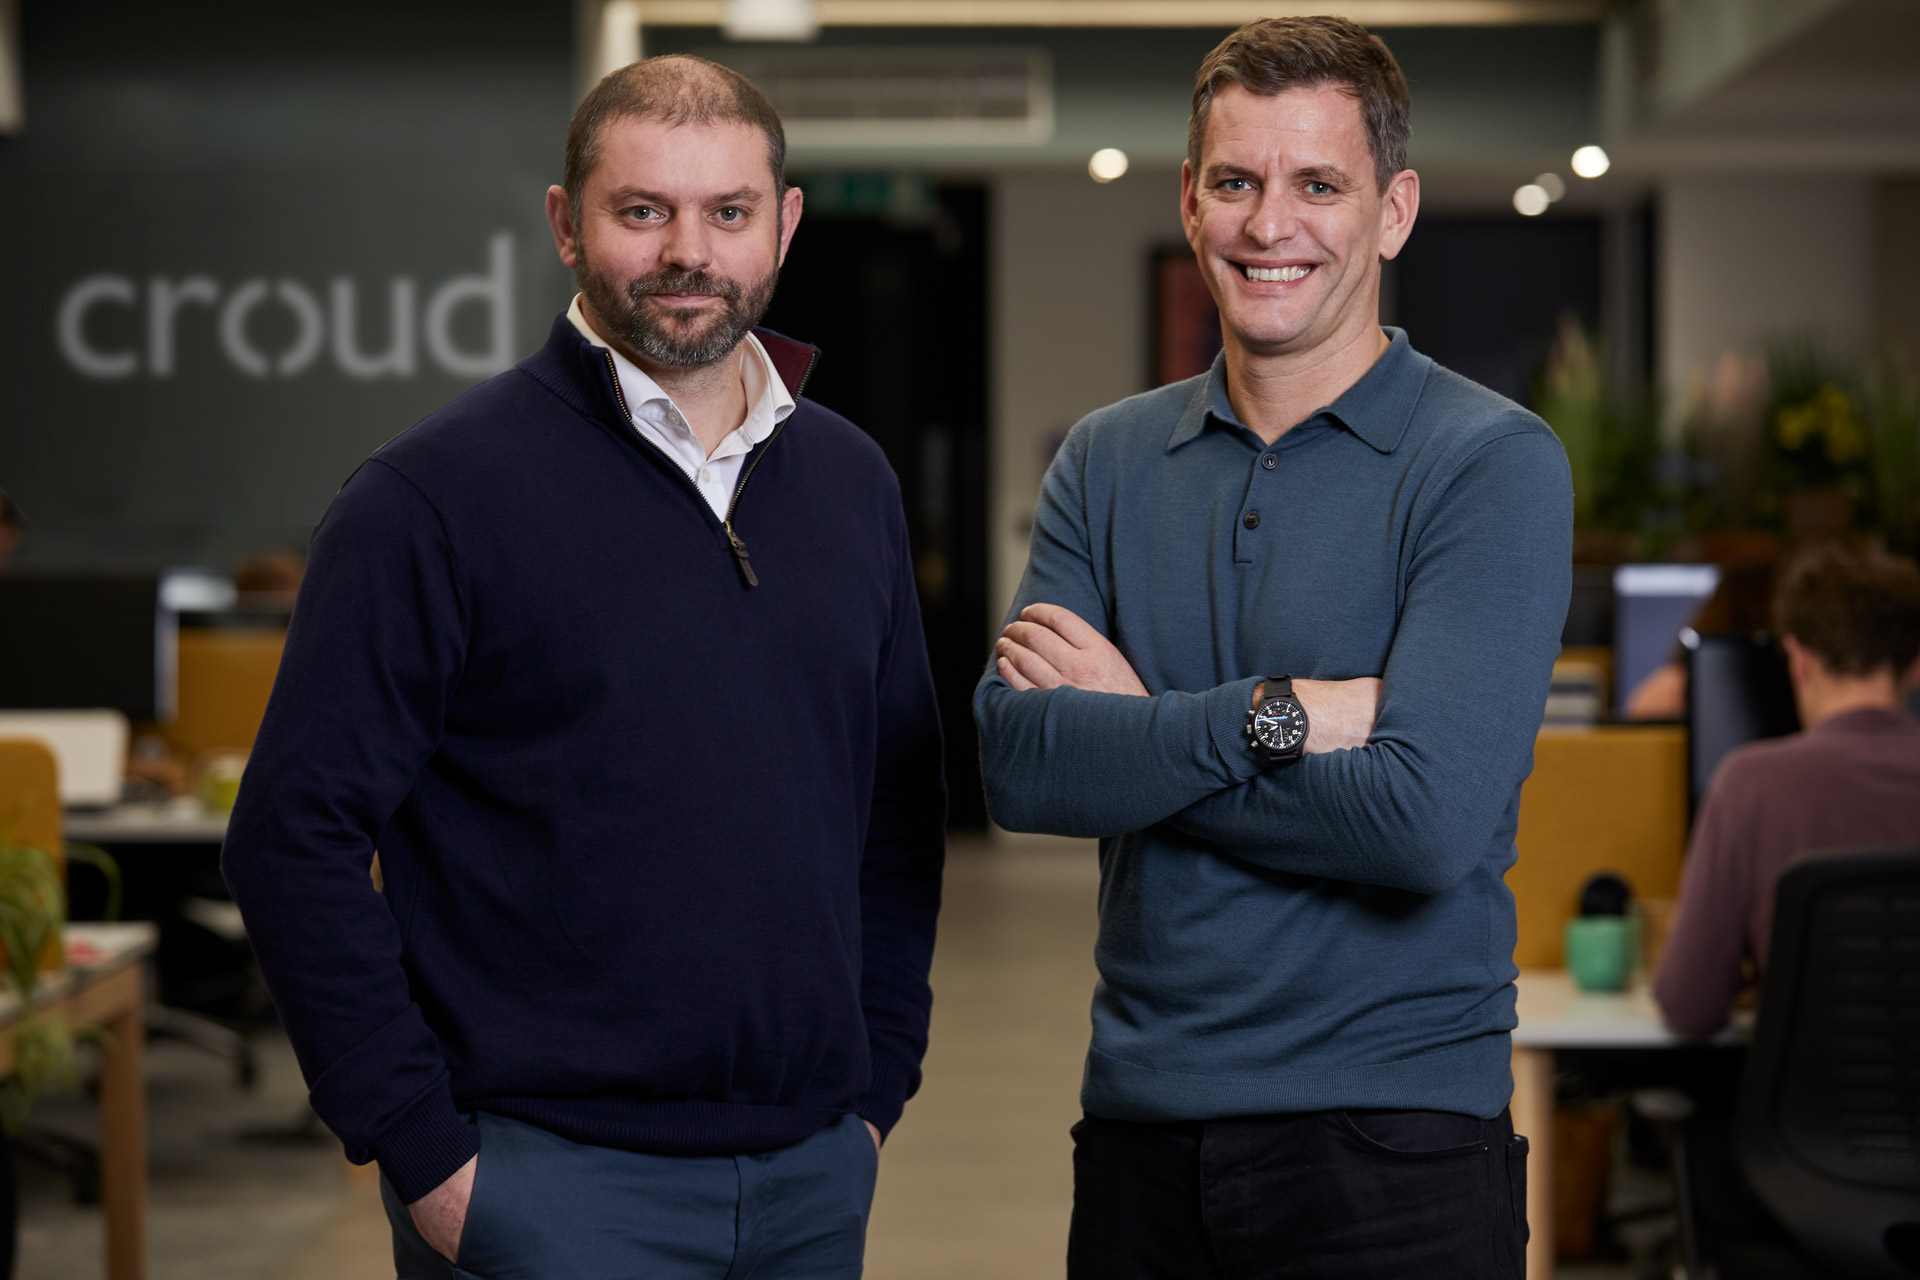 Digital marketing agency Croud secures £30m investment from LDC